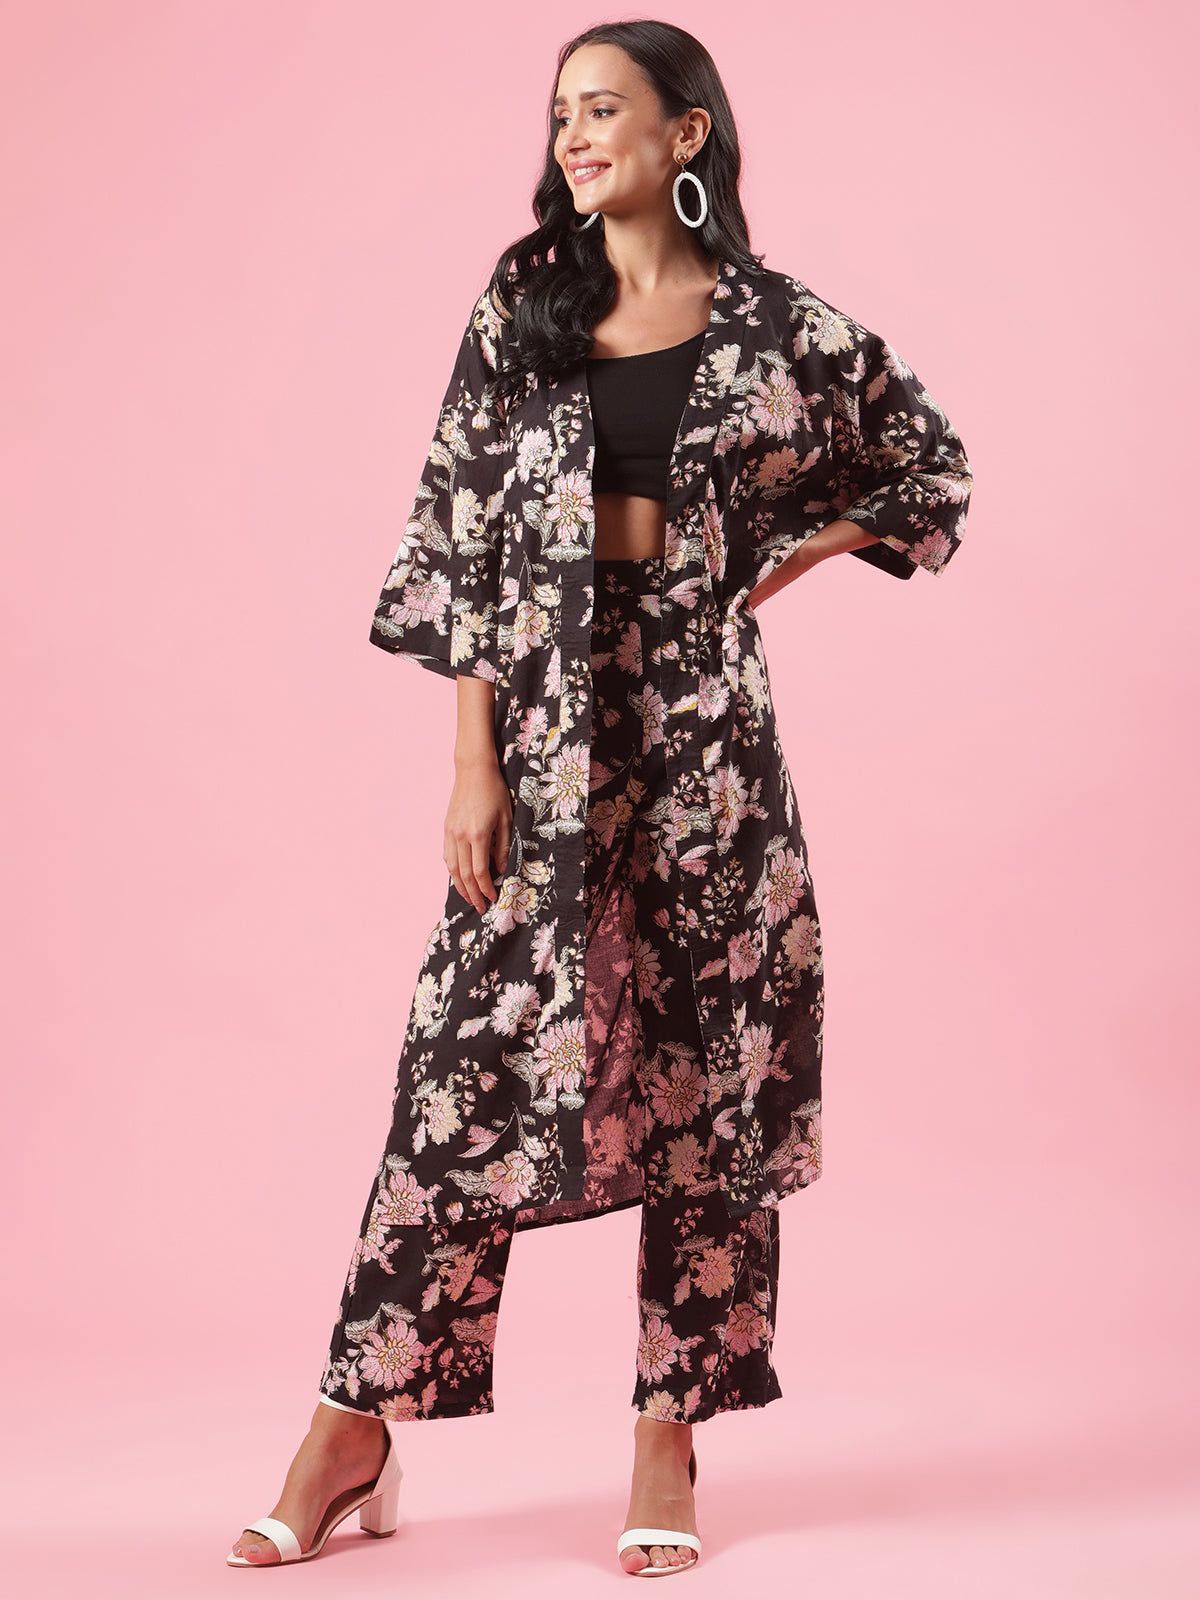 Floral Fever Black Floral Womens Cotton Summer Co-ord Set with Cape